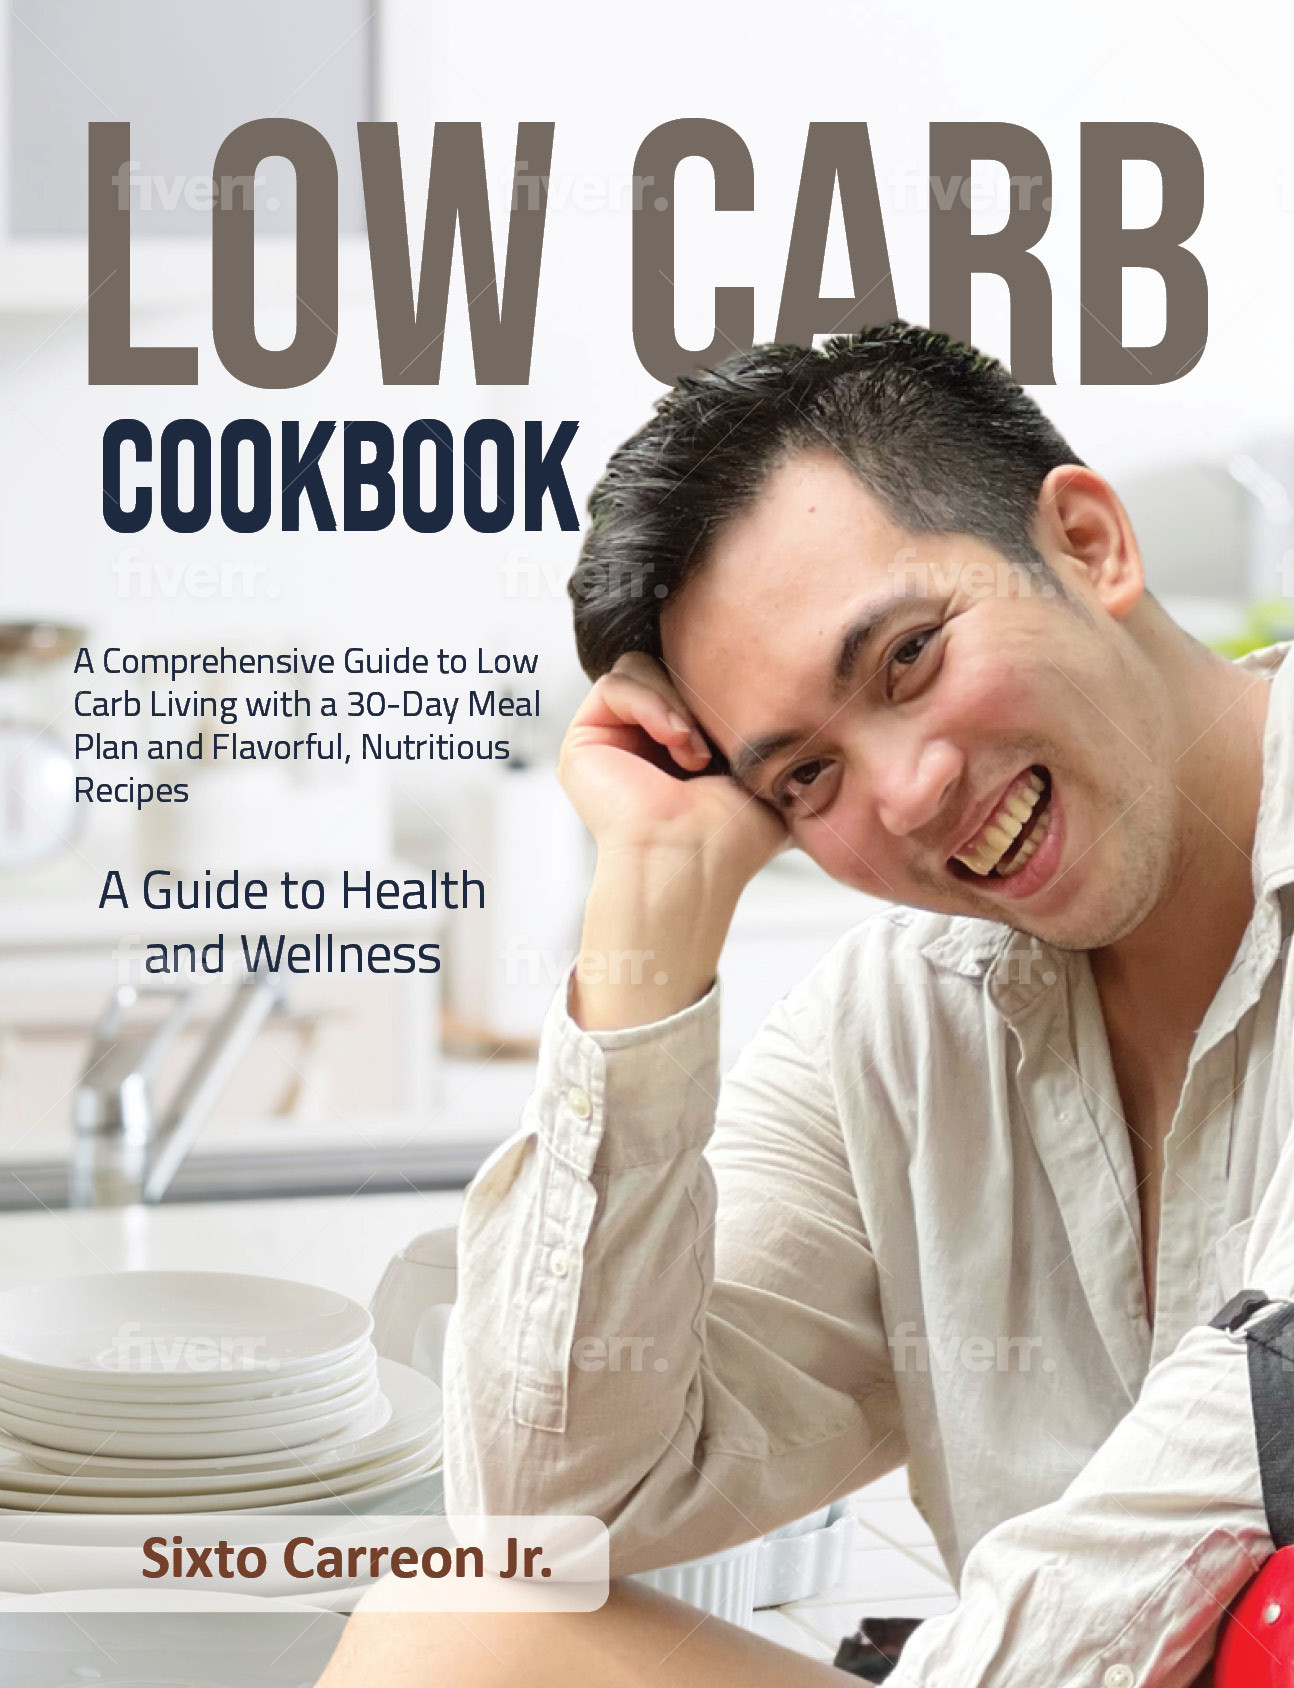 120 Low carb cookbook new